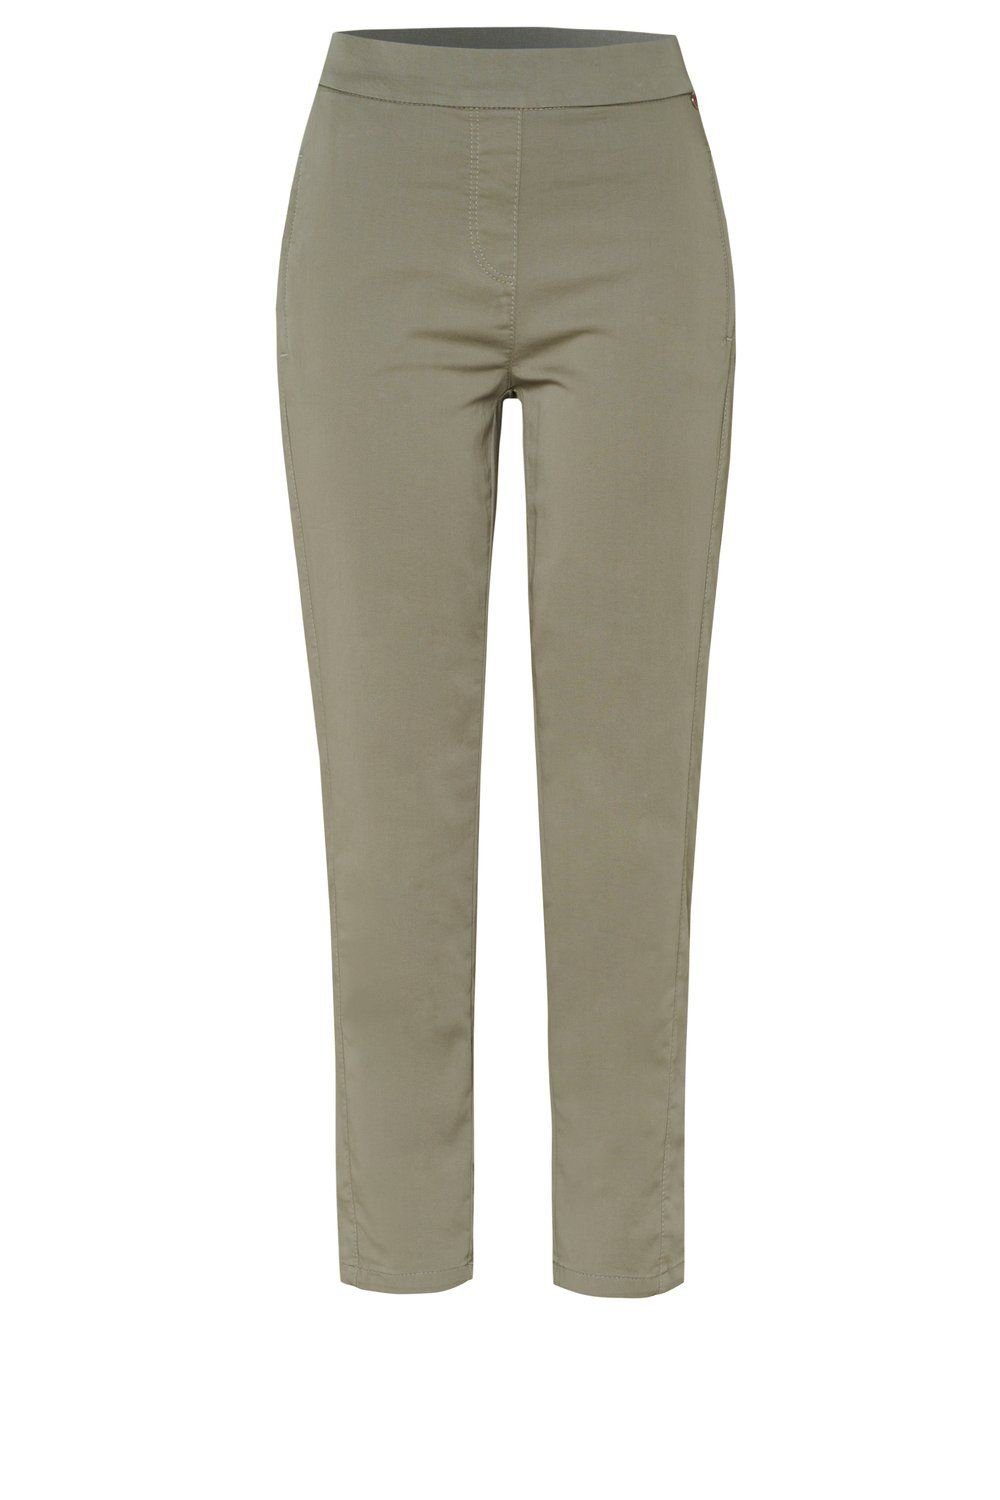 Chinos Relaxed khaki by TONI